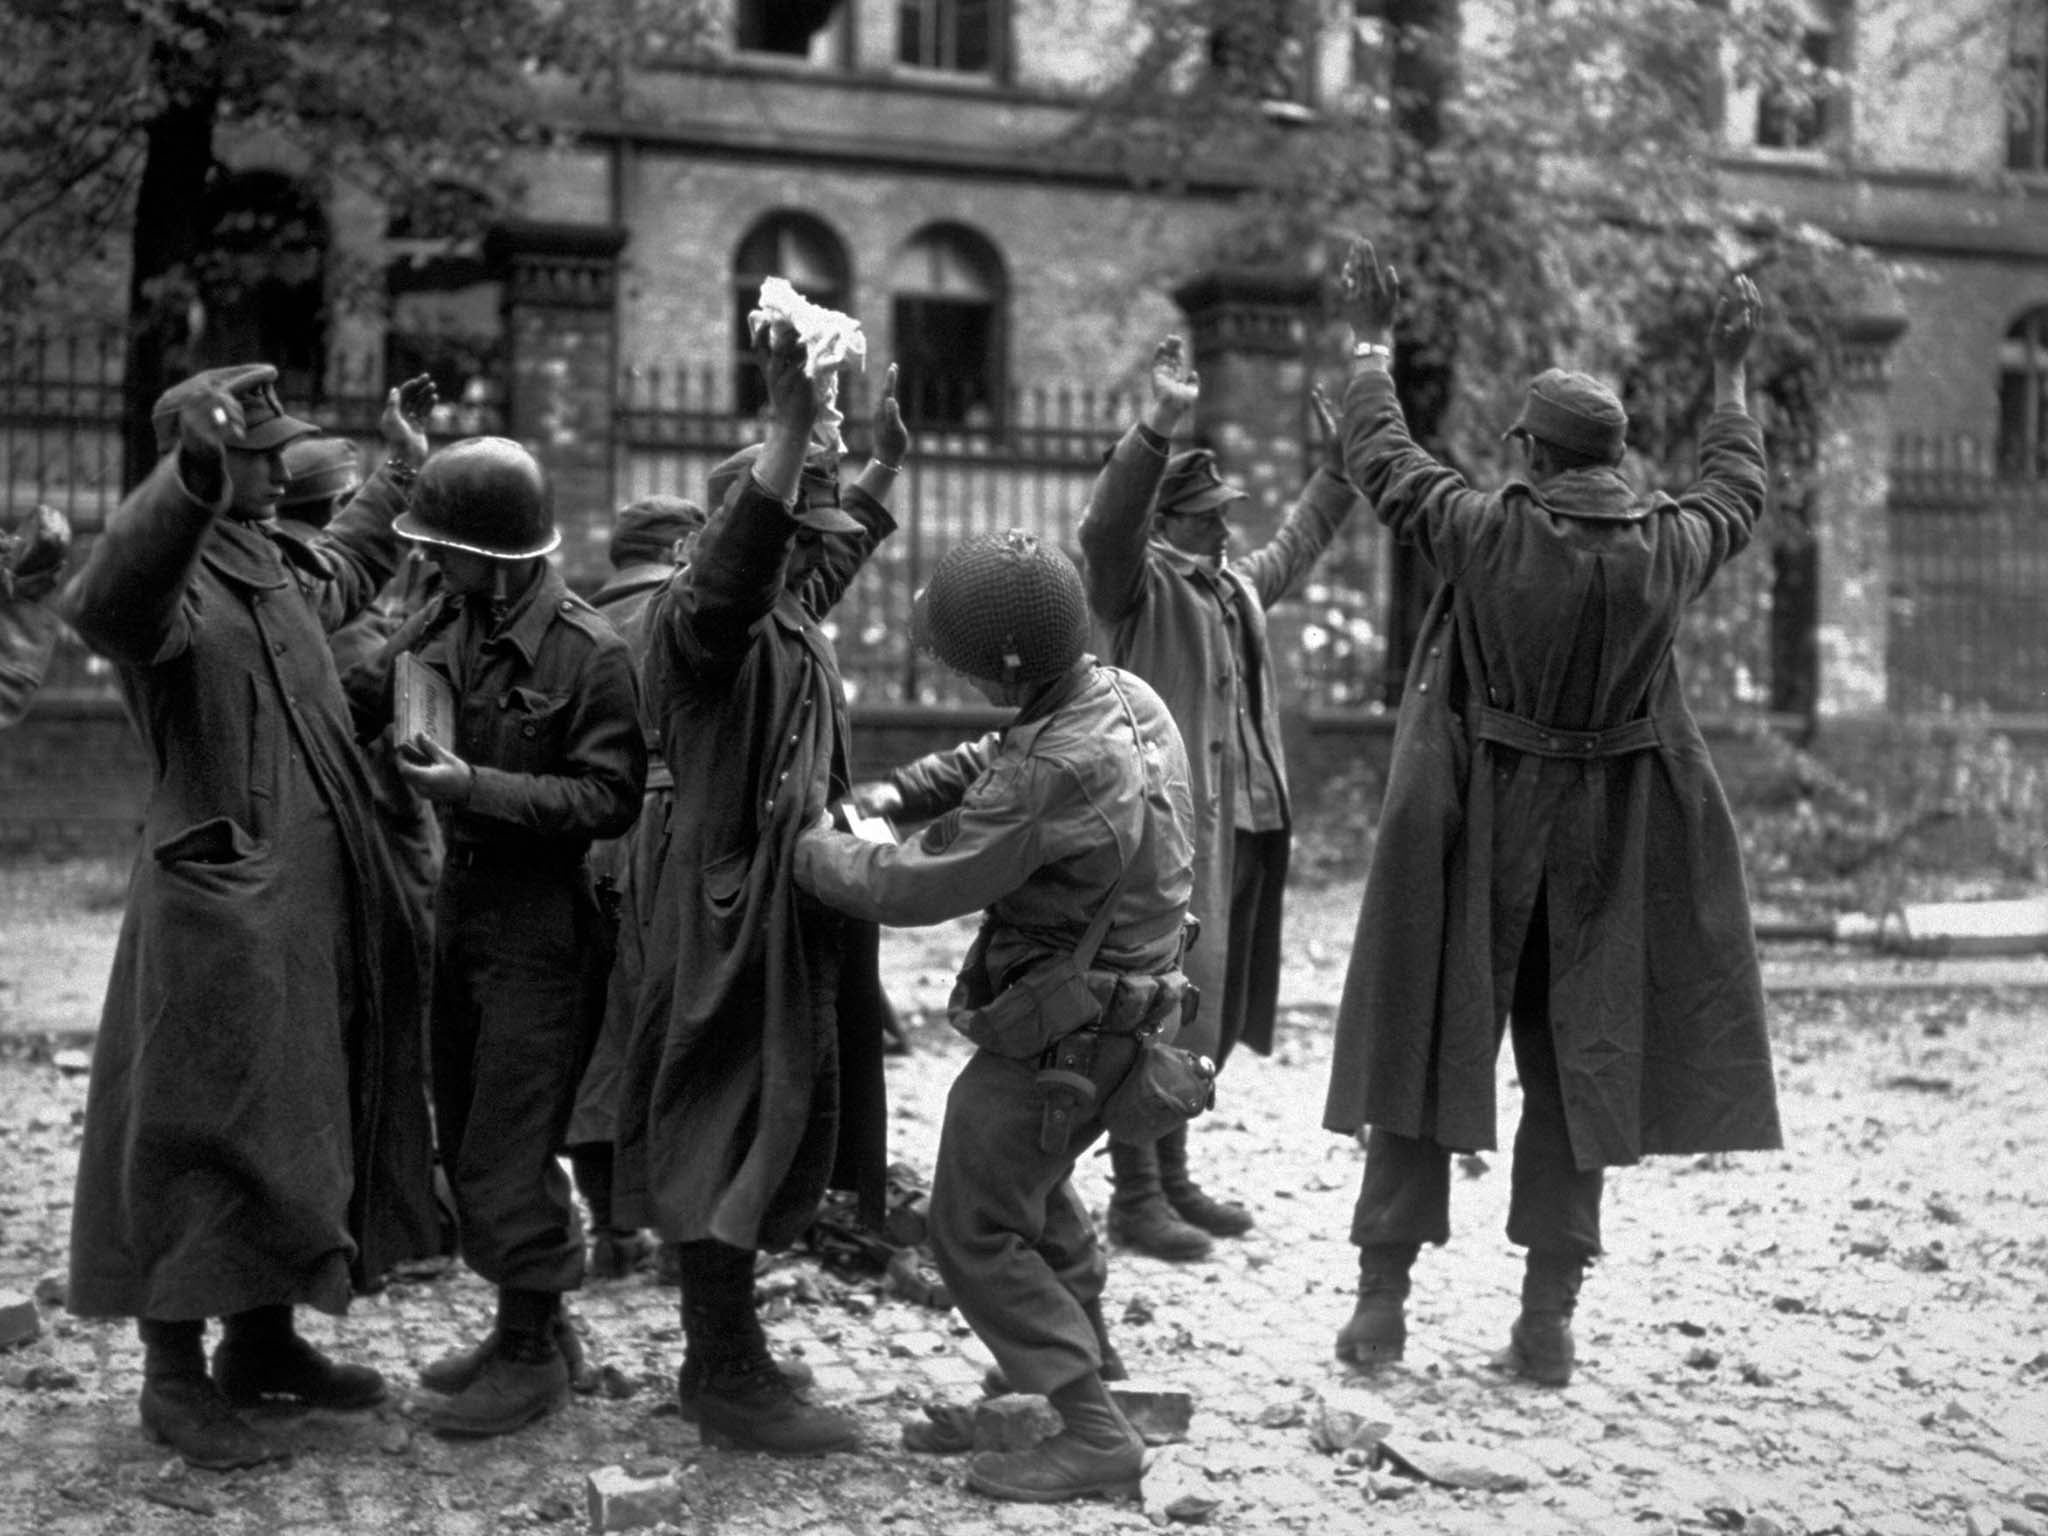 German prisoners captured in the streets of the German town of Aachen.